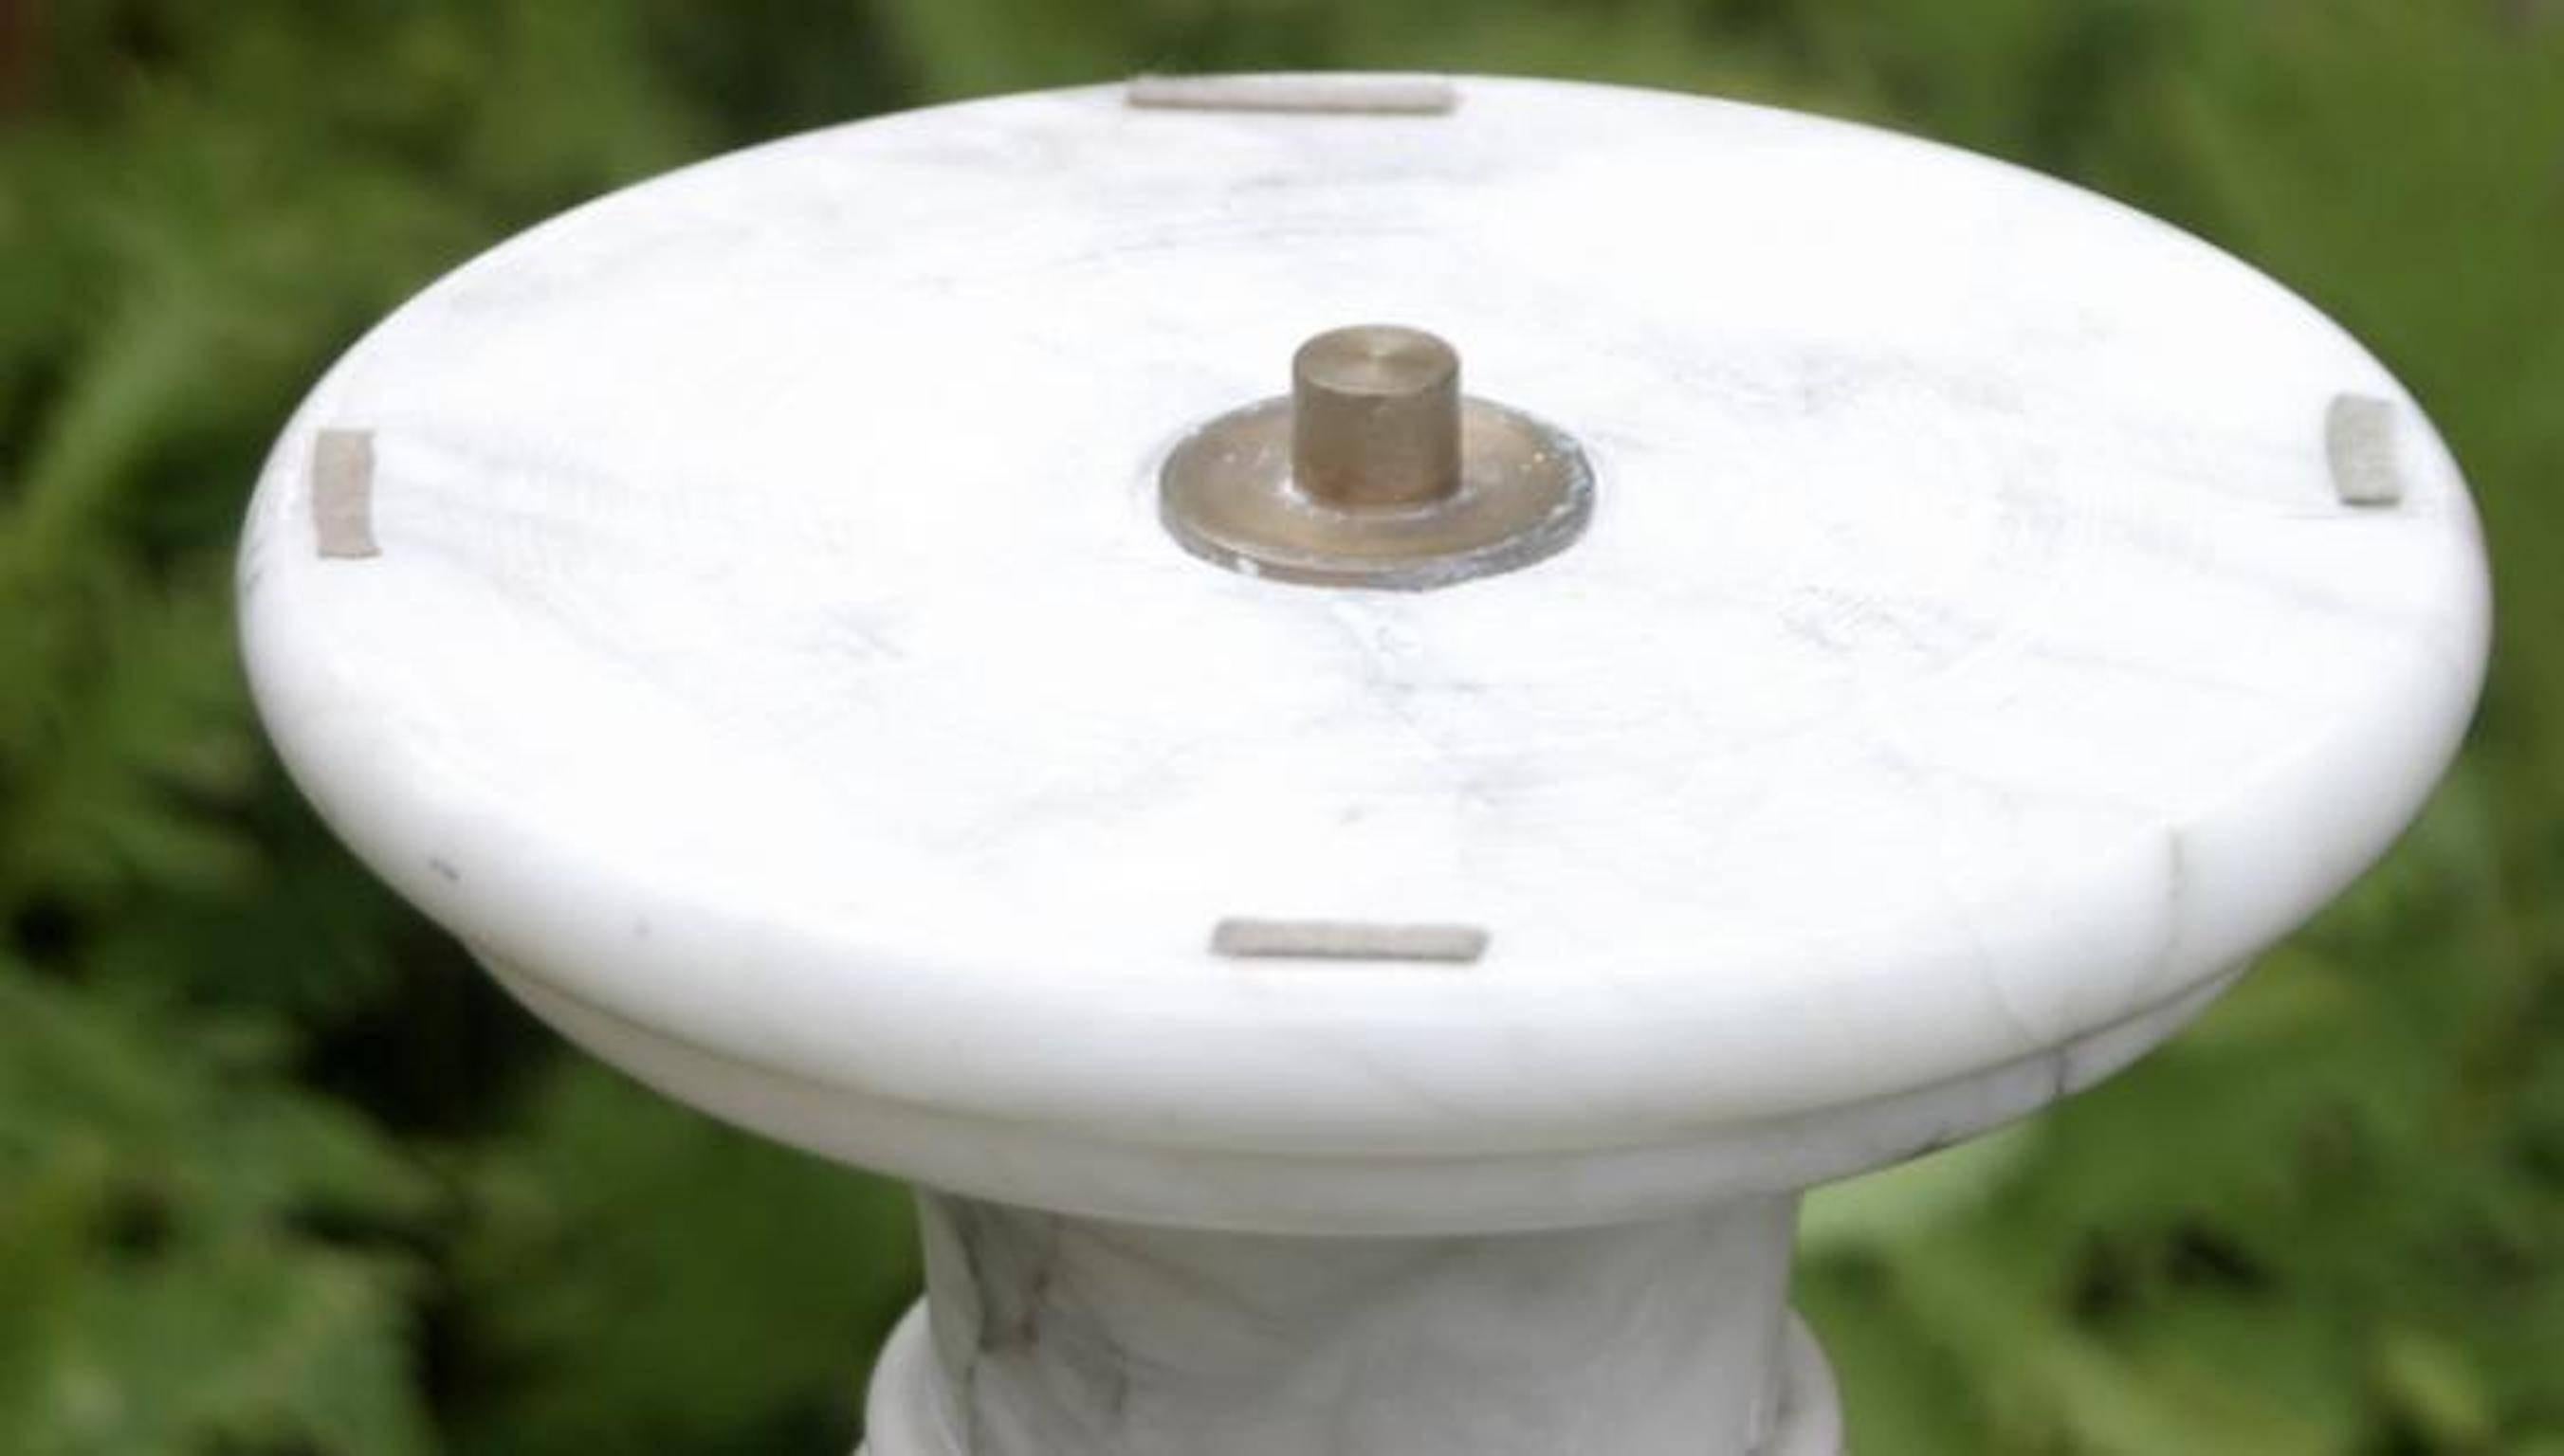 White and gray variegated veined pedestal, octagonal foot, round top with inserted brass pin (for securing bust or statue), no maker's mark.